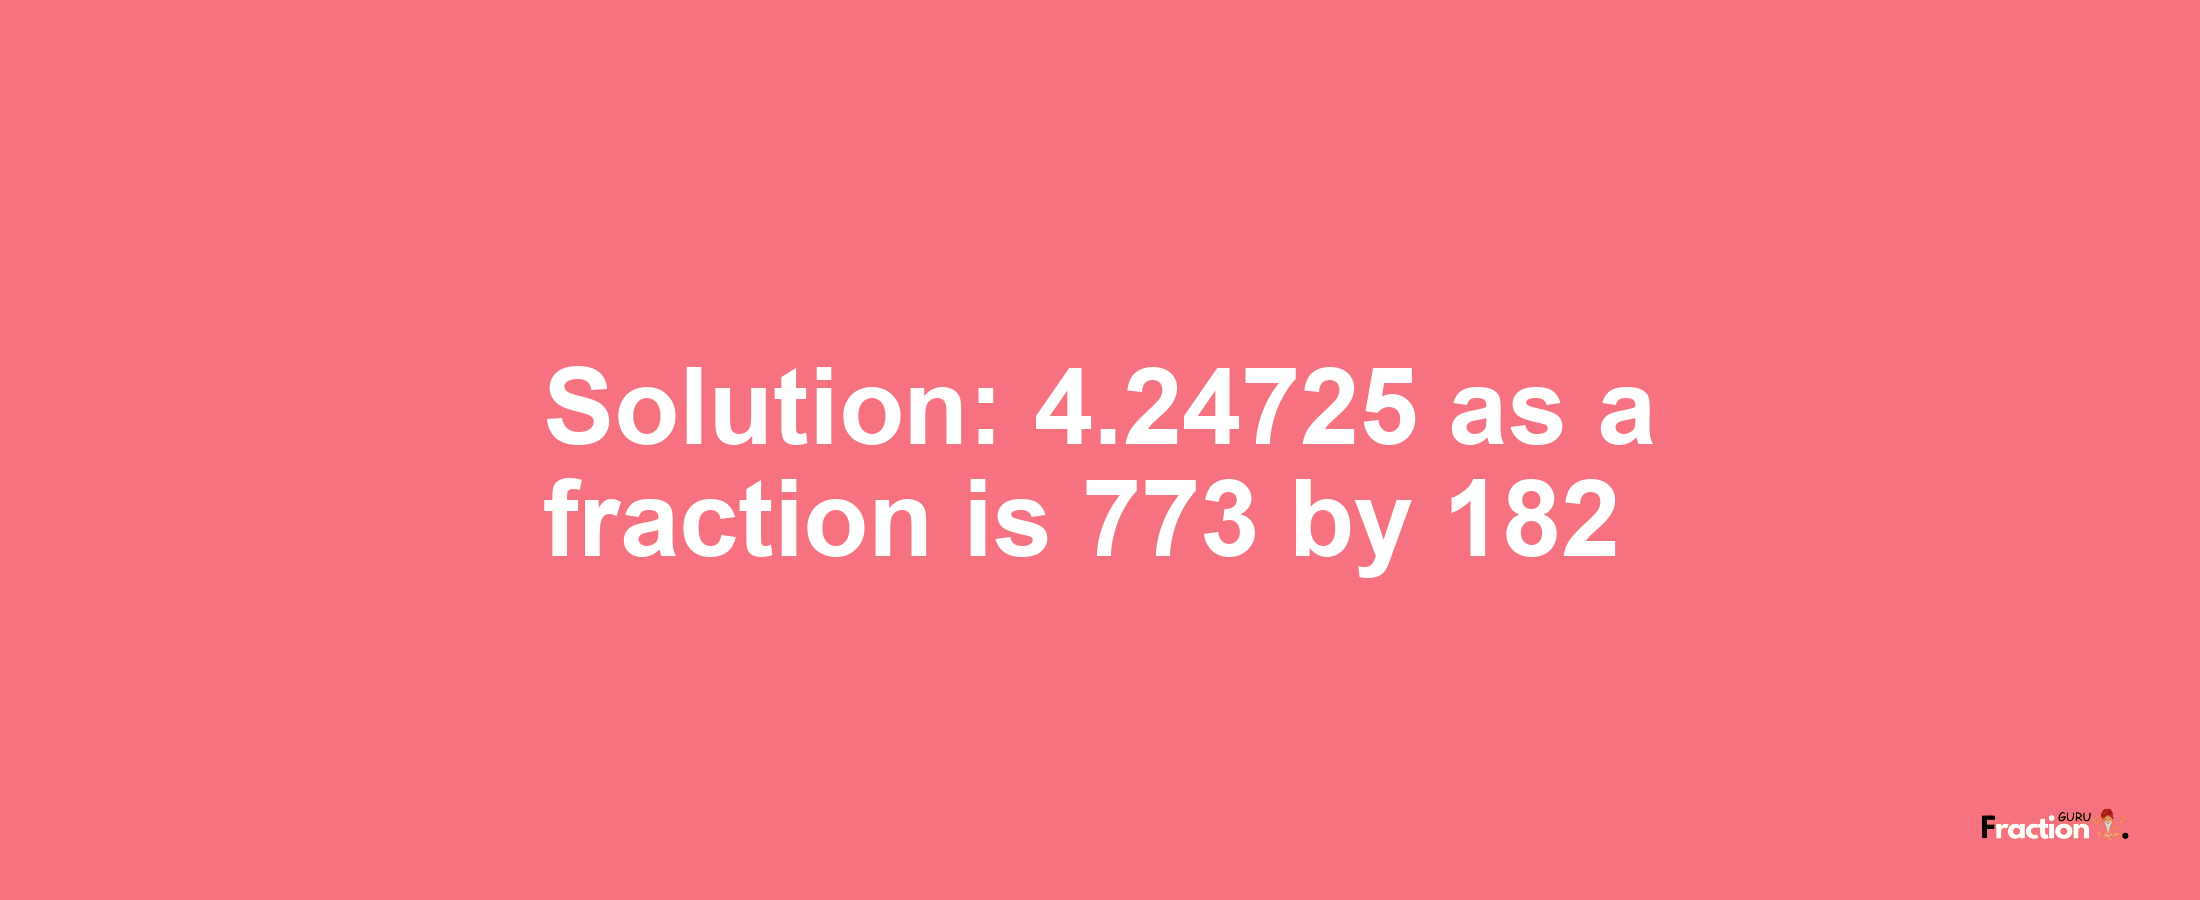 Solution:4.24725 as a fraction is 773/182